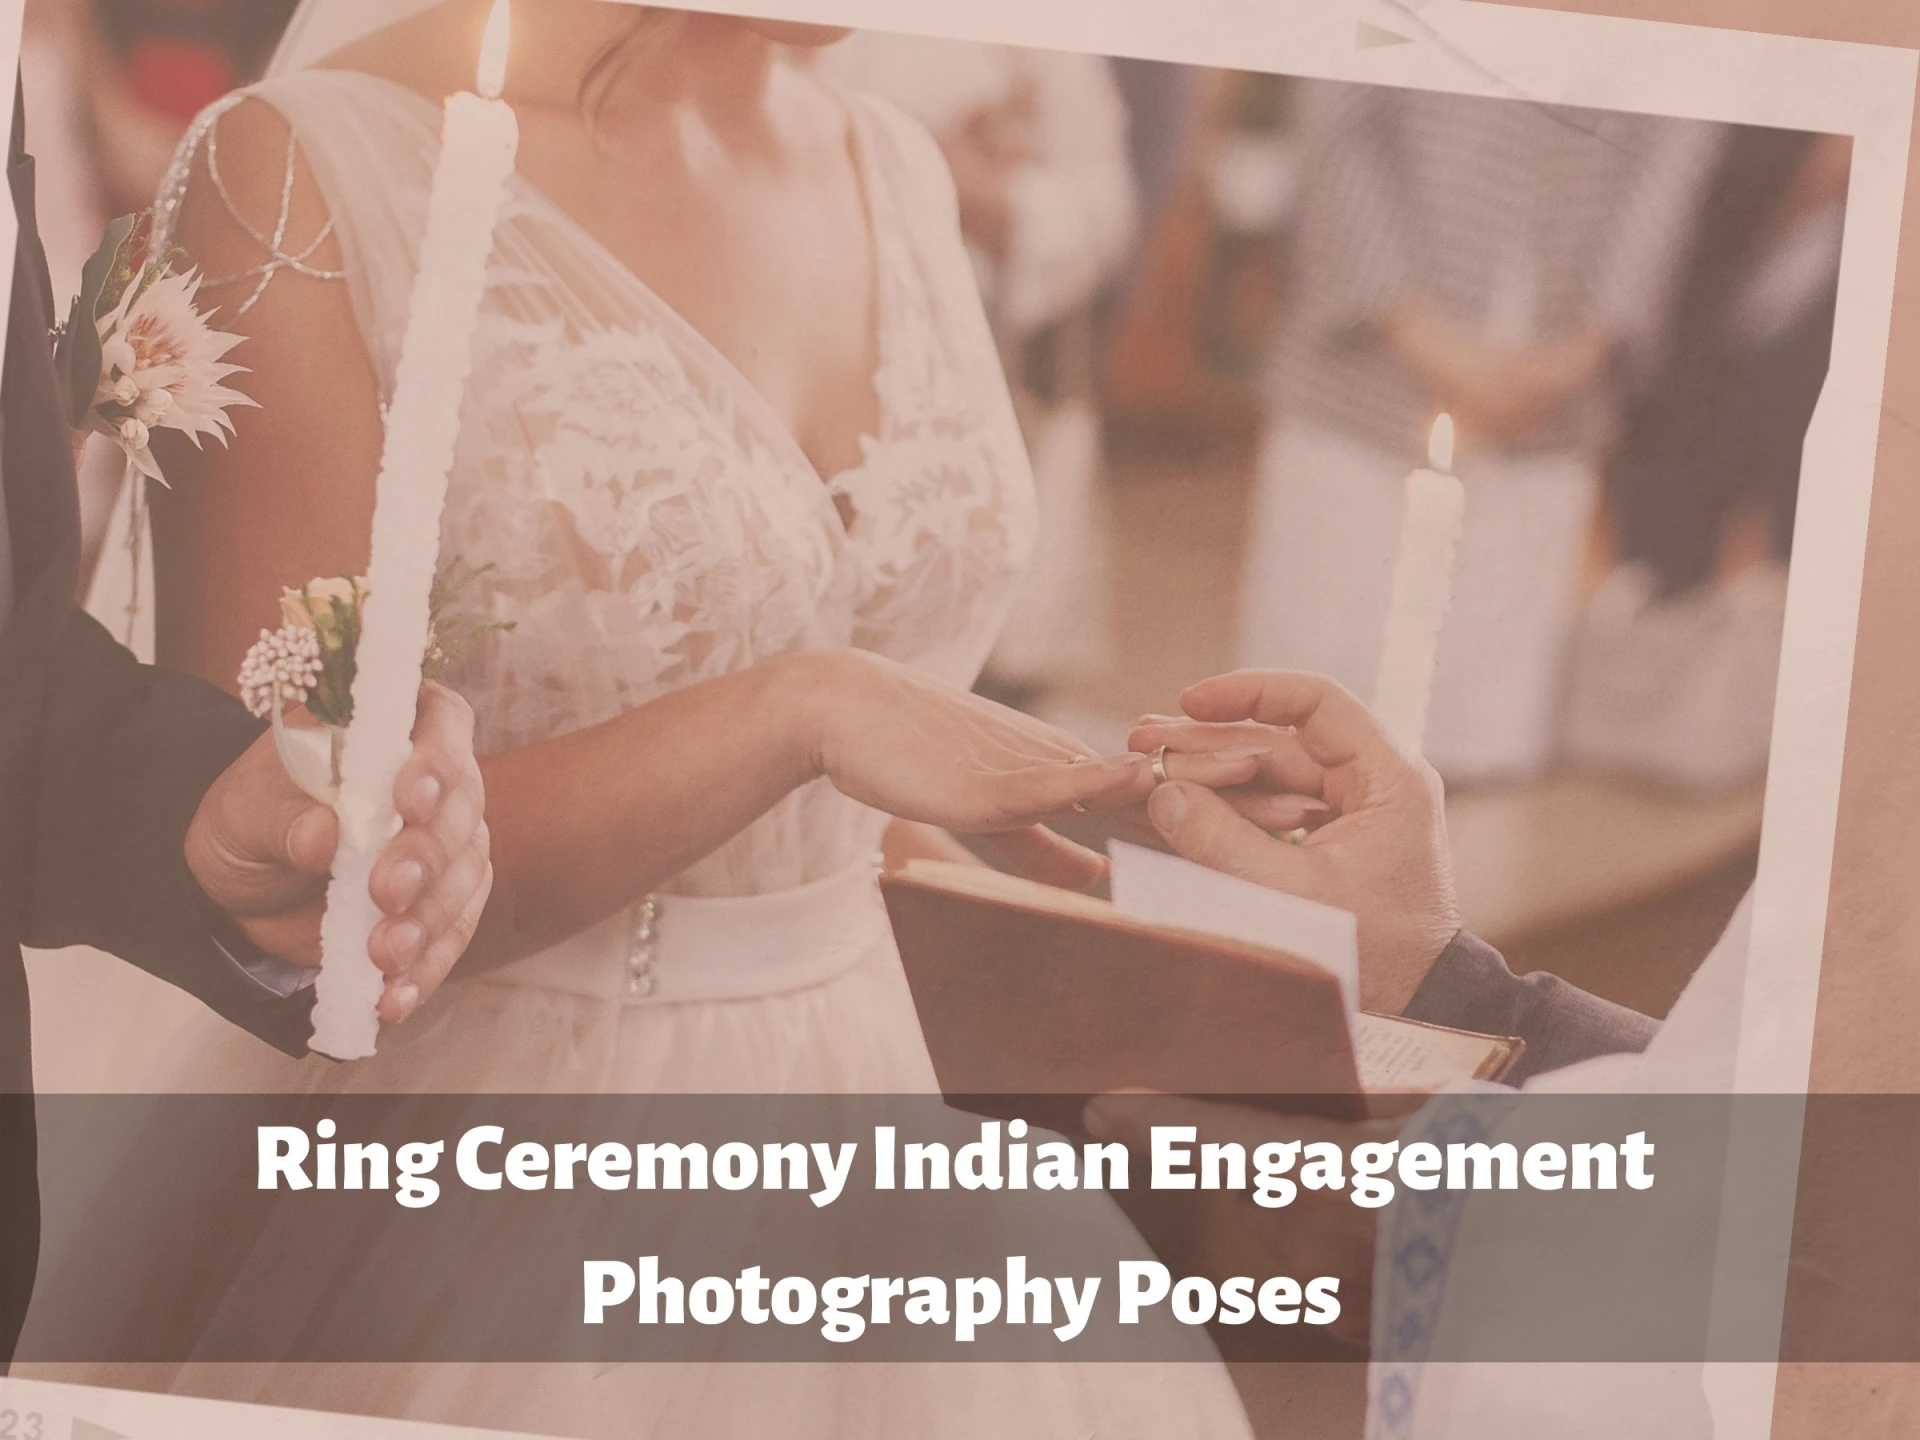 Ring Ceremony Projects :: Photos, videos, logos, illustrations and branding  :: Behance